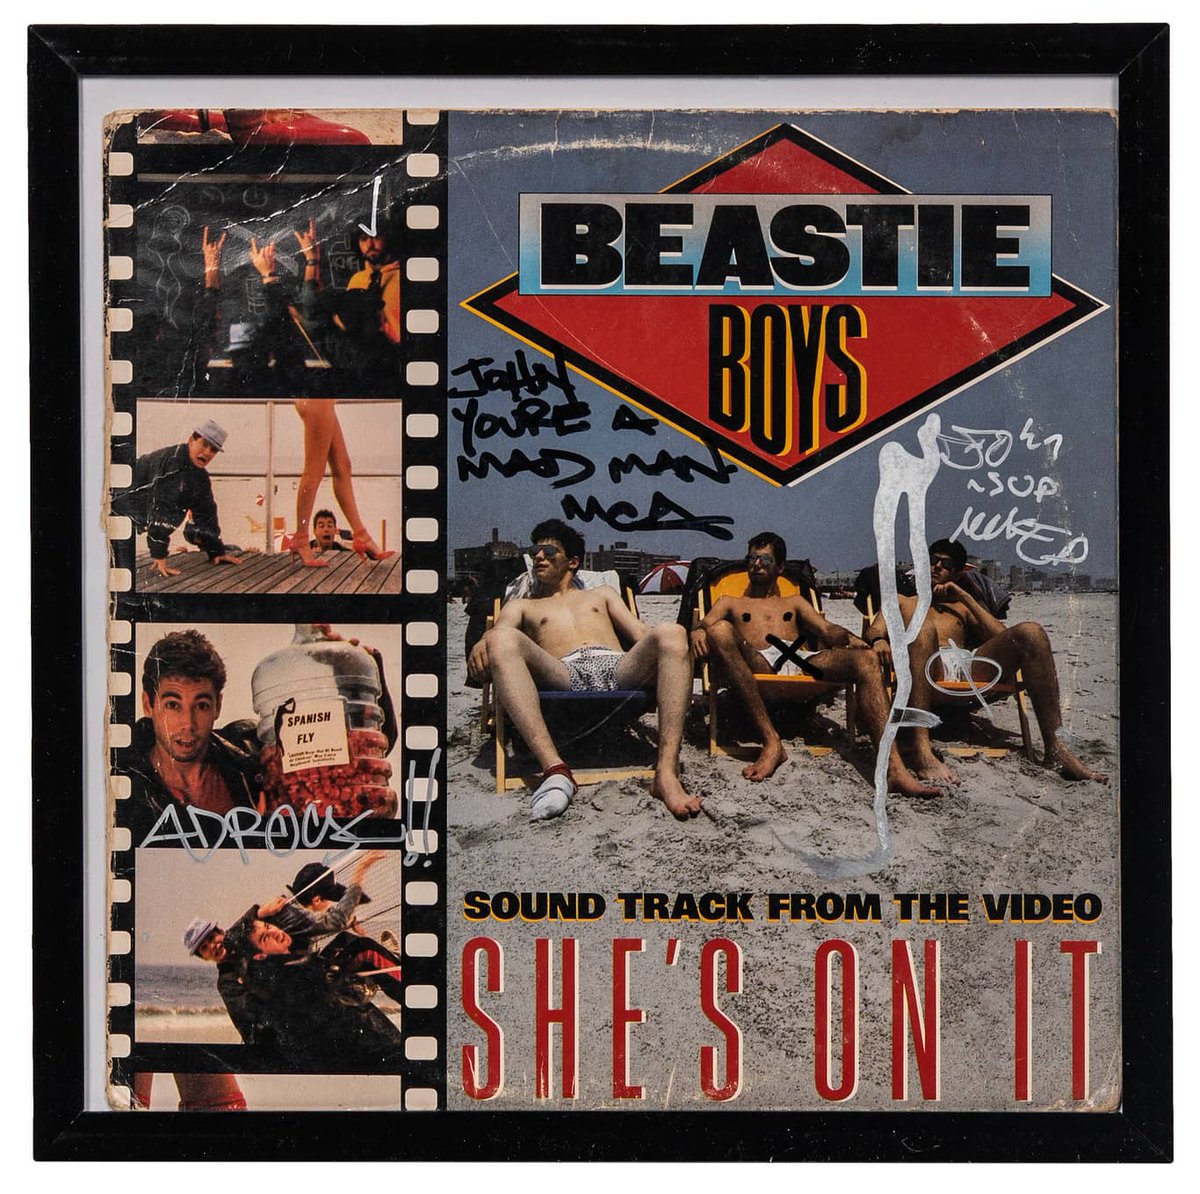 Released as the fifth single from the 1985 soundtrack for the hip-hop film Crush Groove, the Beastie Boys signed this offered 'She's On It' Single Vinyl Record from the film, resting inside a 14-by-14-inch frame 🤩 Bid now in our March Pop Culture Elite: bit.ly/4cHDZzG